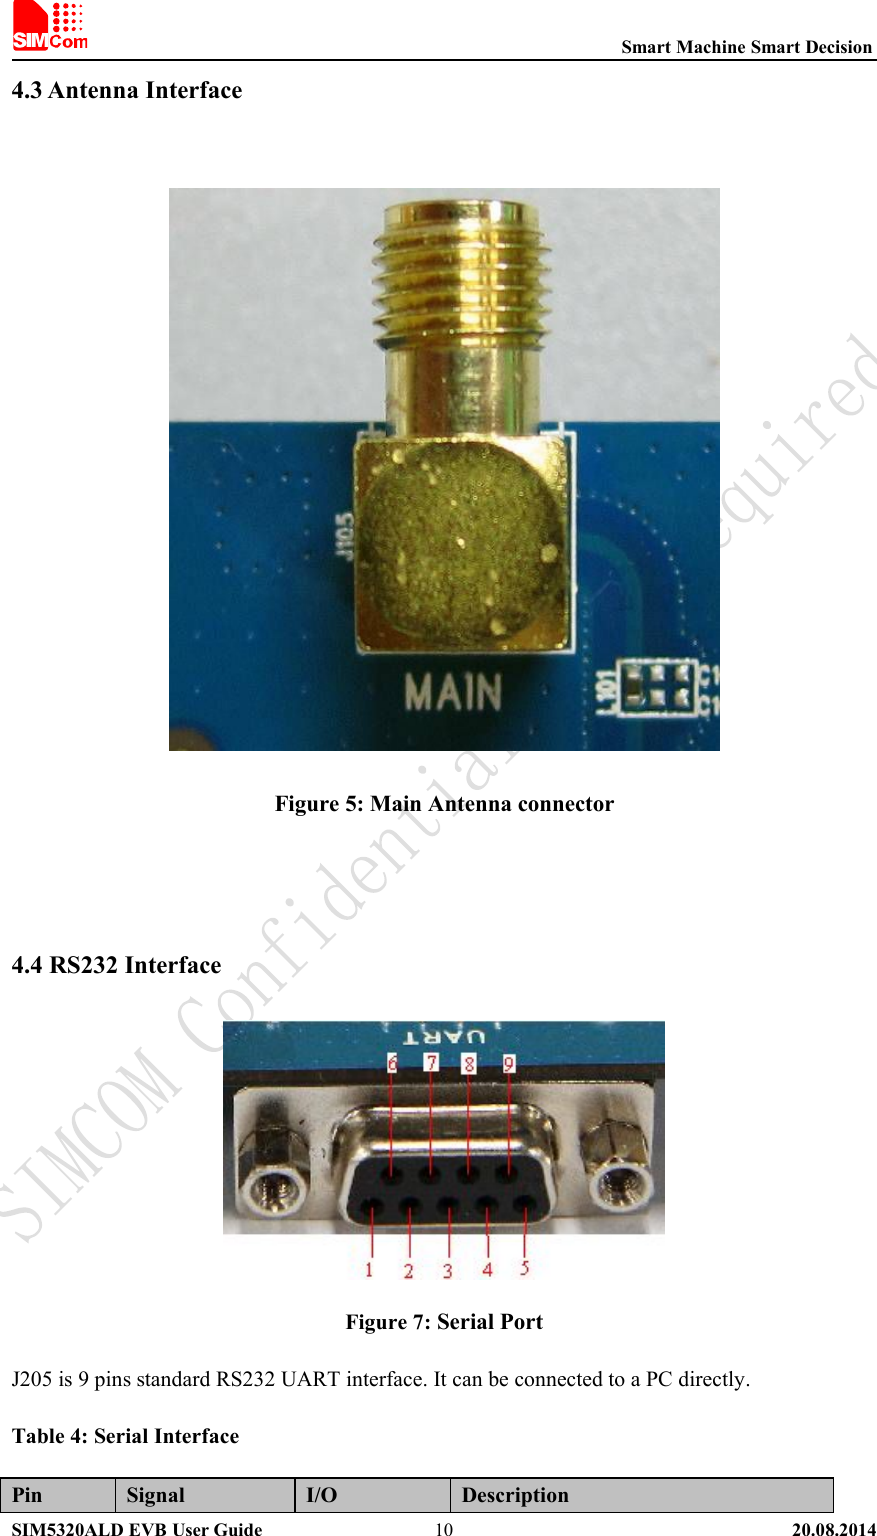 Smart Machine Smart DecisionSIM5320ALD EVB User Guide 20.08.2014104.3 Antenna InterfaceFigure 5: Main Antenna connector4.4 RS232 InterfaceFigure 7: Serial PortJ205 is 9 pins standard RS232 UART interface. It can be connected to a PC directly.Table 4: Serial InterfacePin Signal I/O Description